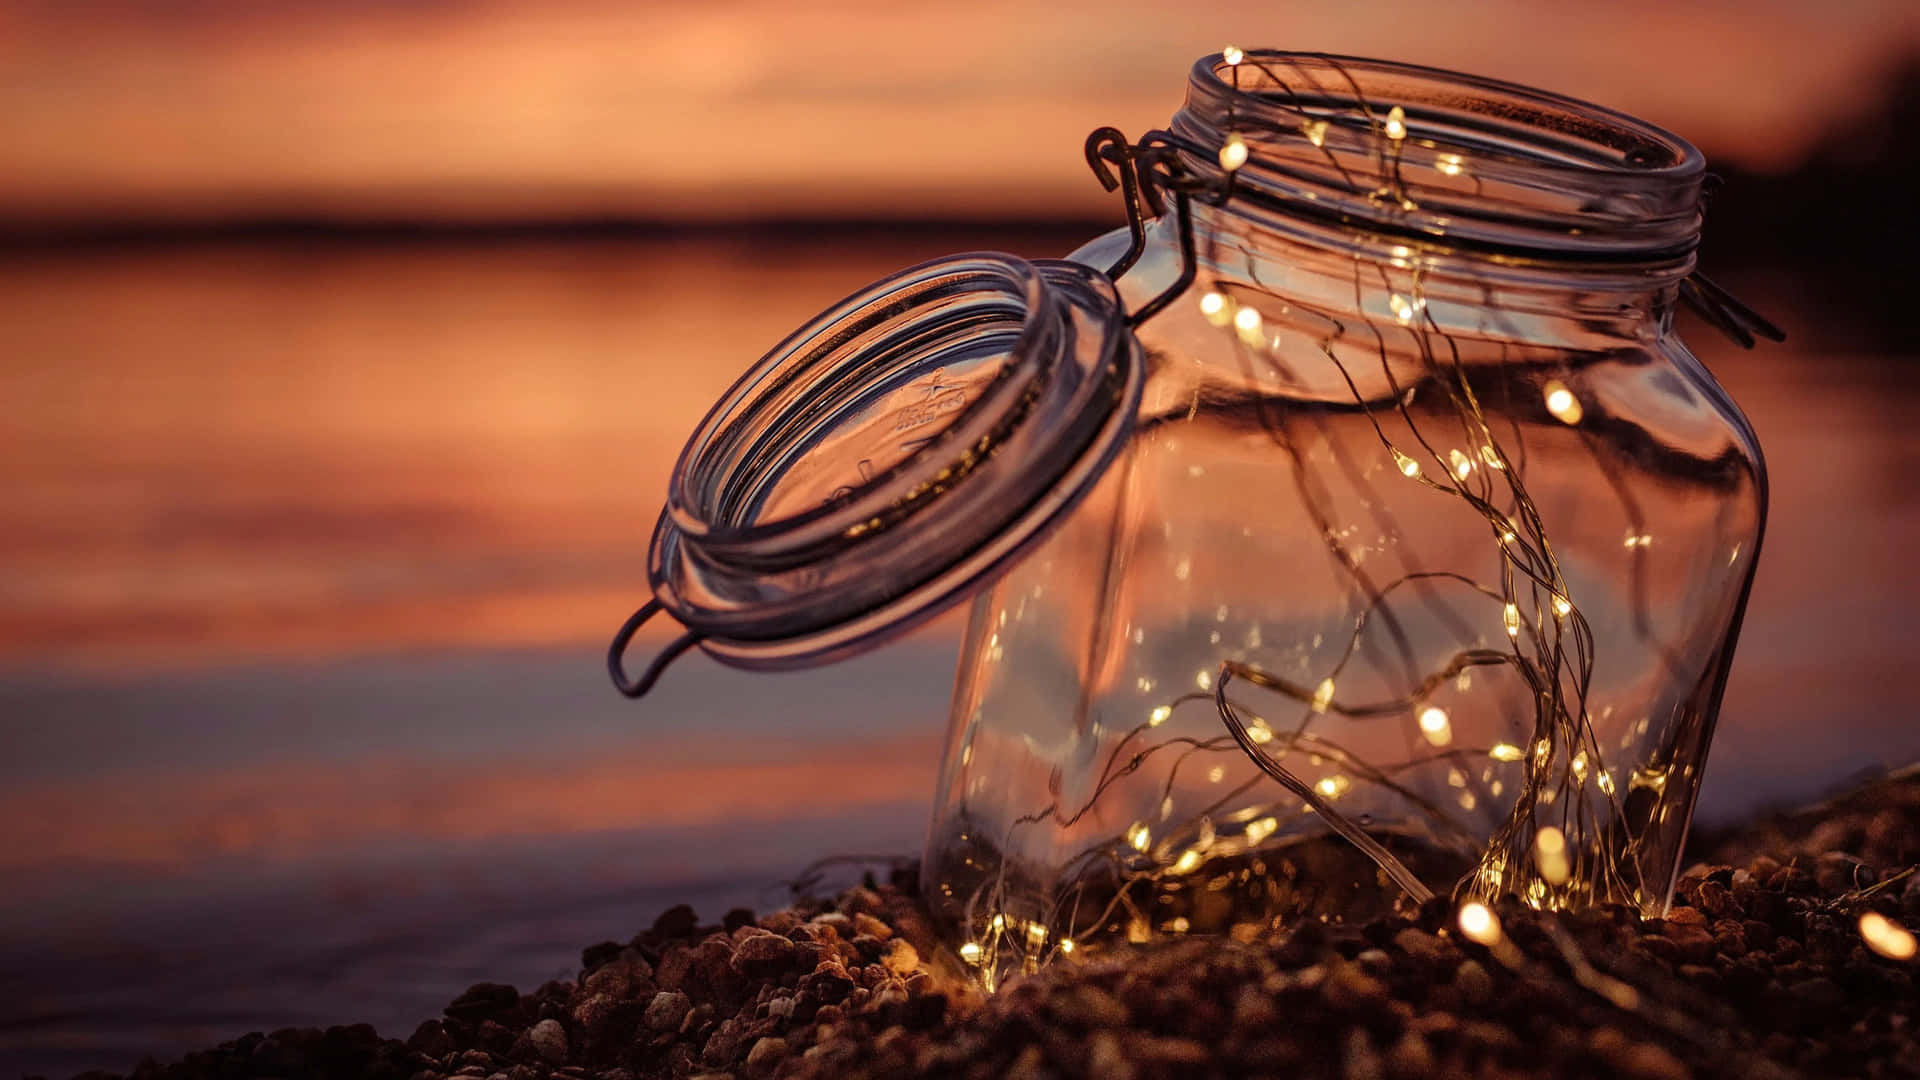 a glass jar with lights on it sitting on the shore